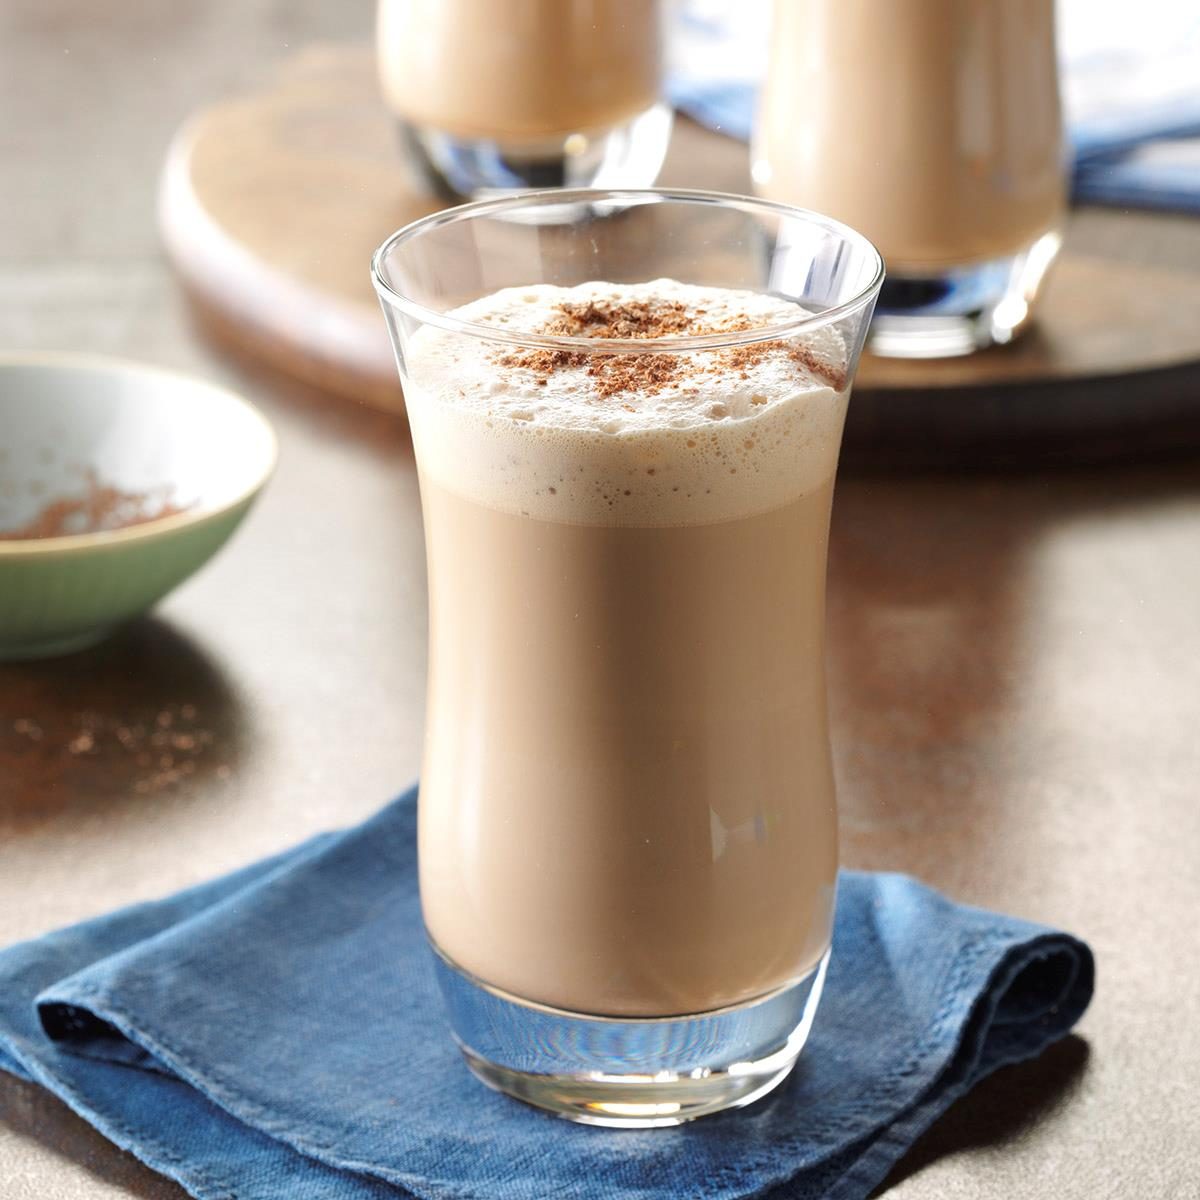 https://www.tasteofhome.com/wp-content/uploads/2018/01/Cappuccino-Punch_EXPS_HPBZ16_19462_D05_24_2b.jpg?fit=700%2C1024